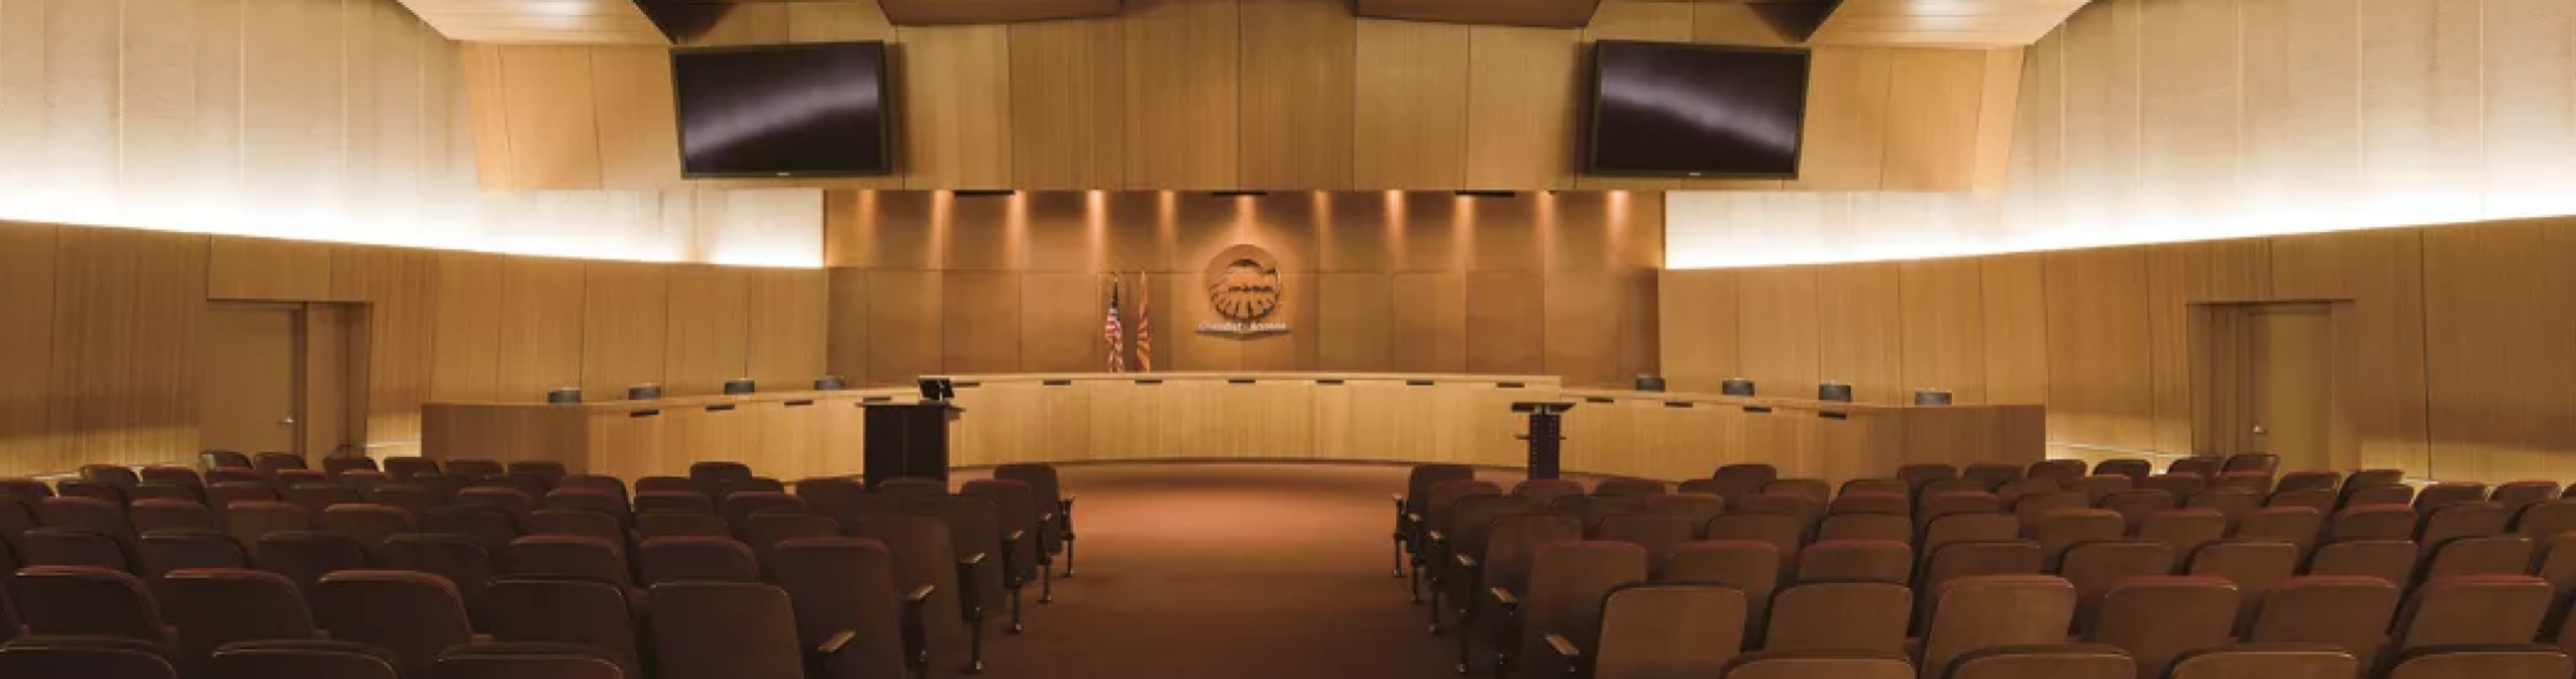 City of Chandler Council Chambers